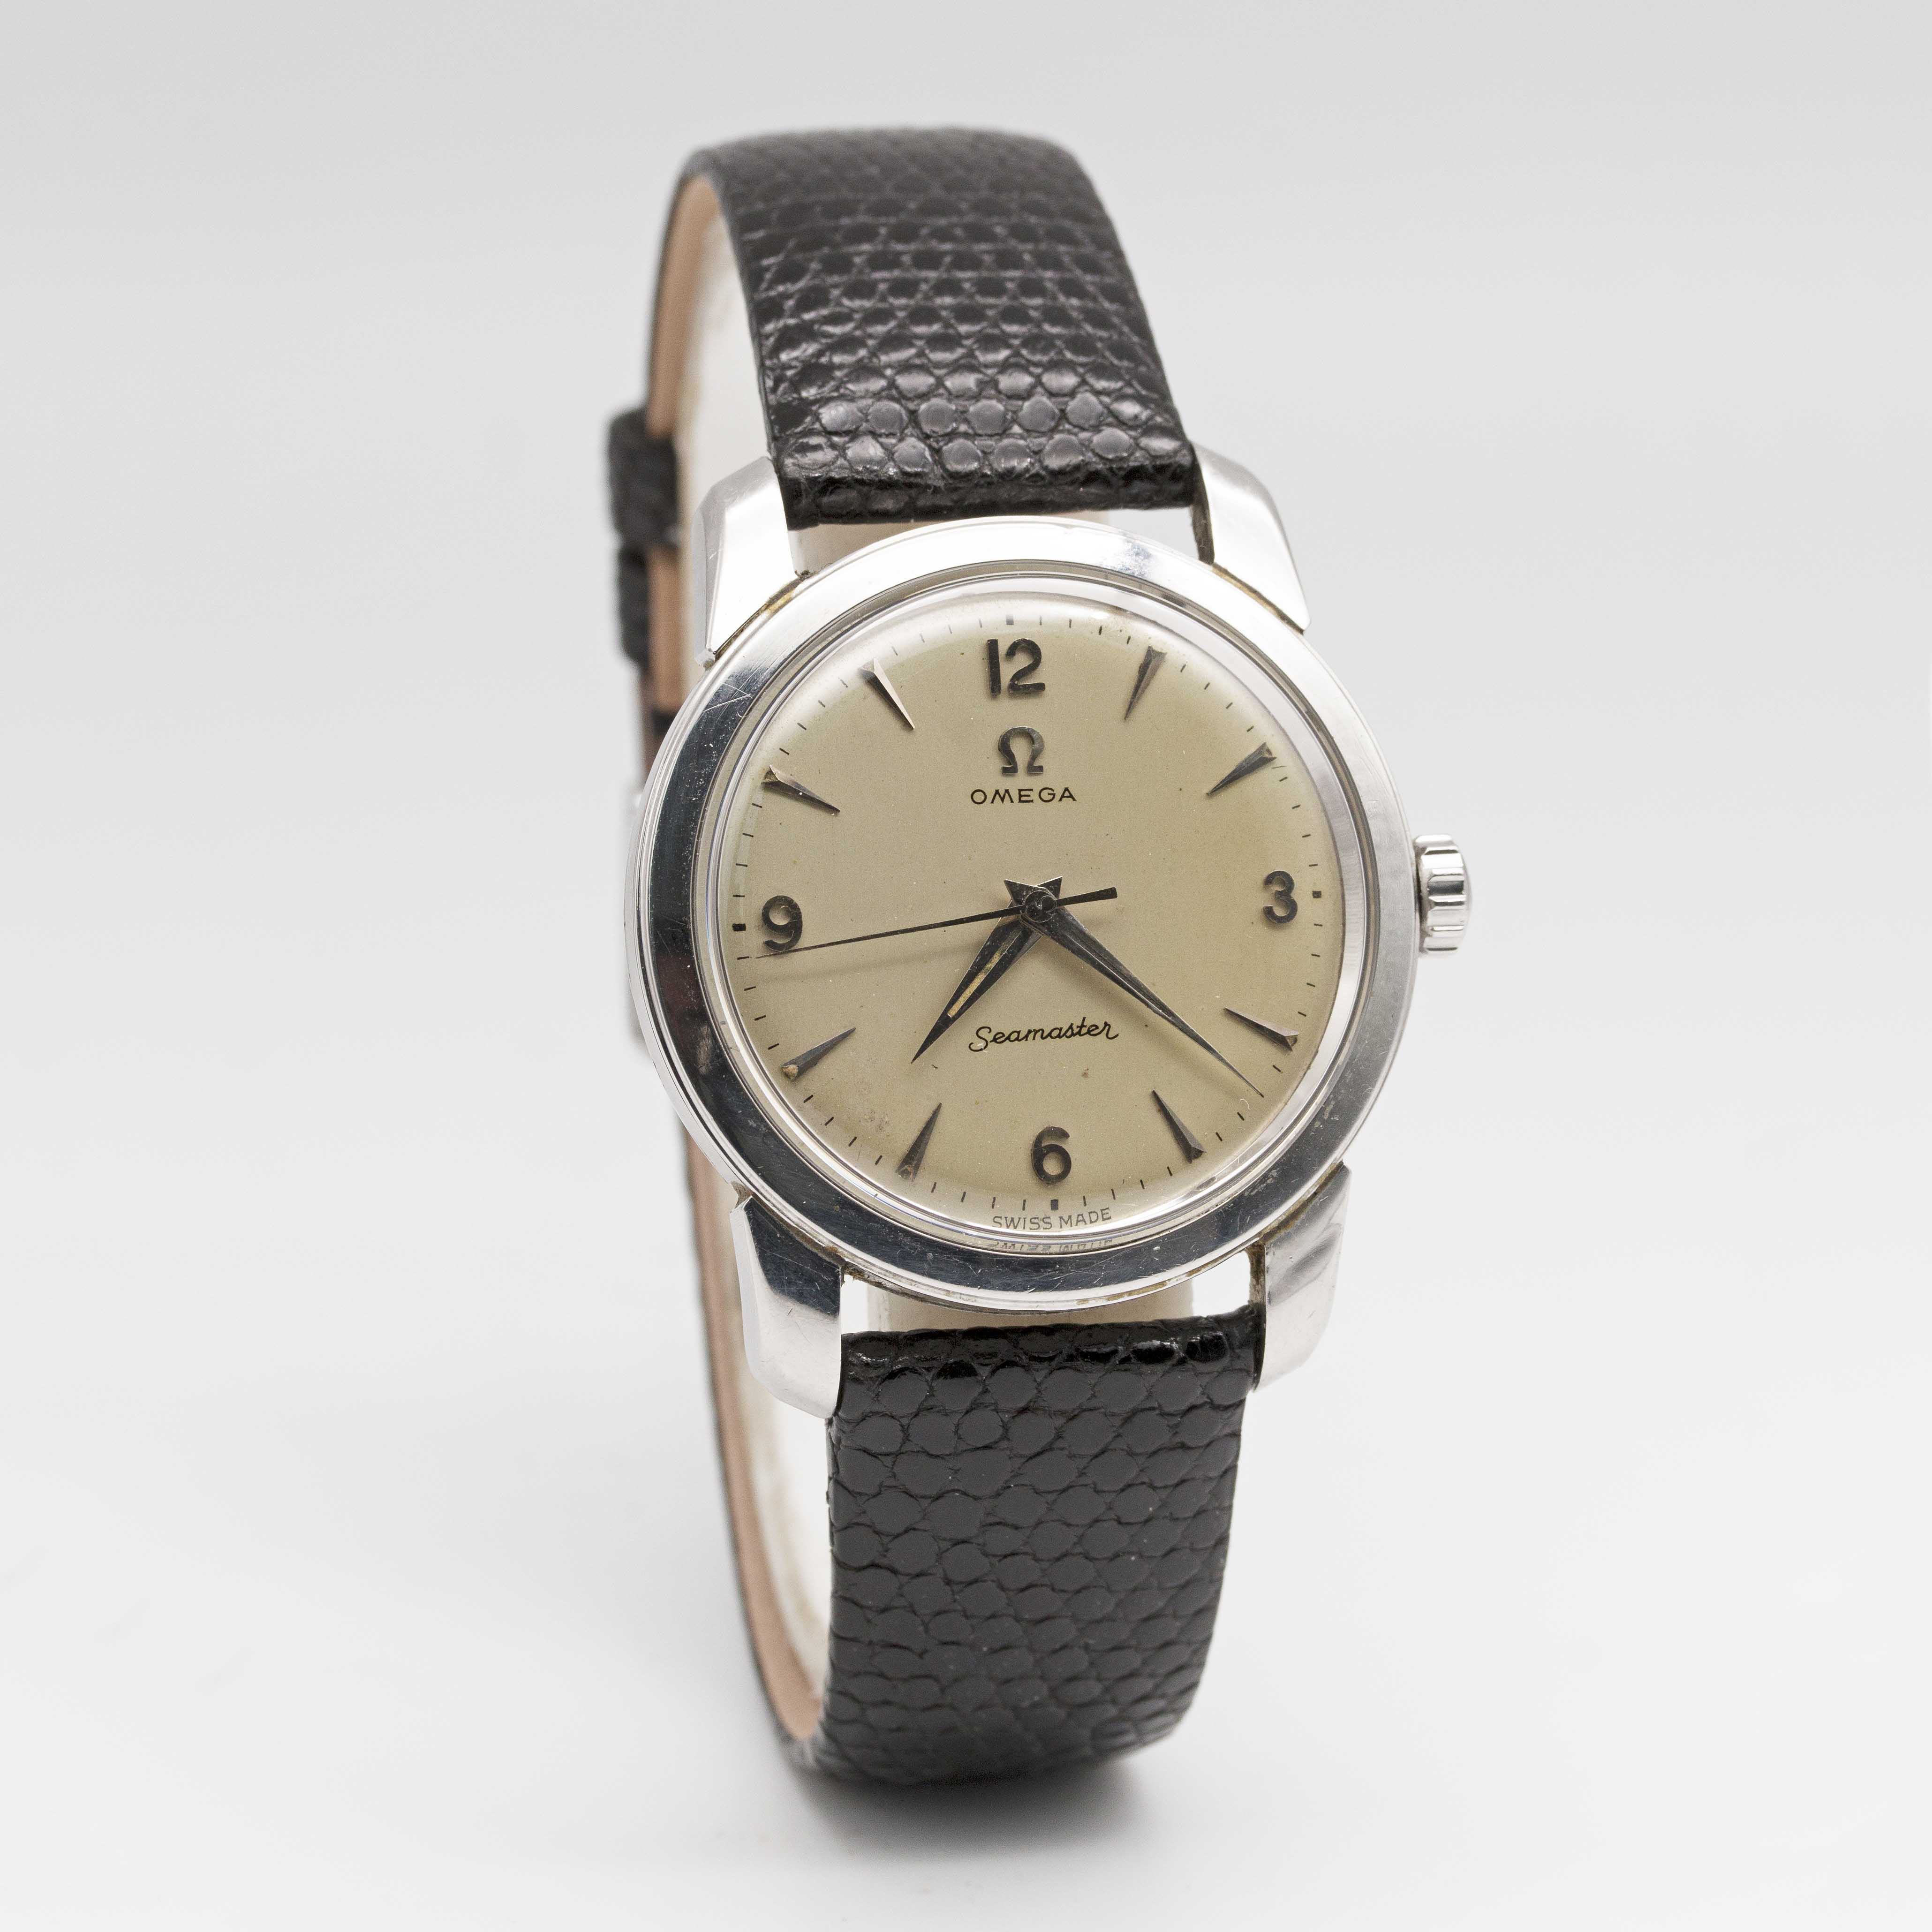 A GENTLEMAN'S STAINLESS STEEL OMEGA SEAMASTER WRIST WATCH  CIRCA 1954, WITH QUARTERLY ARABIC - Image 5 of 11